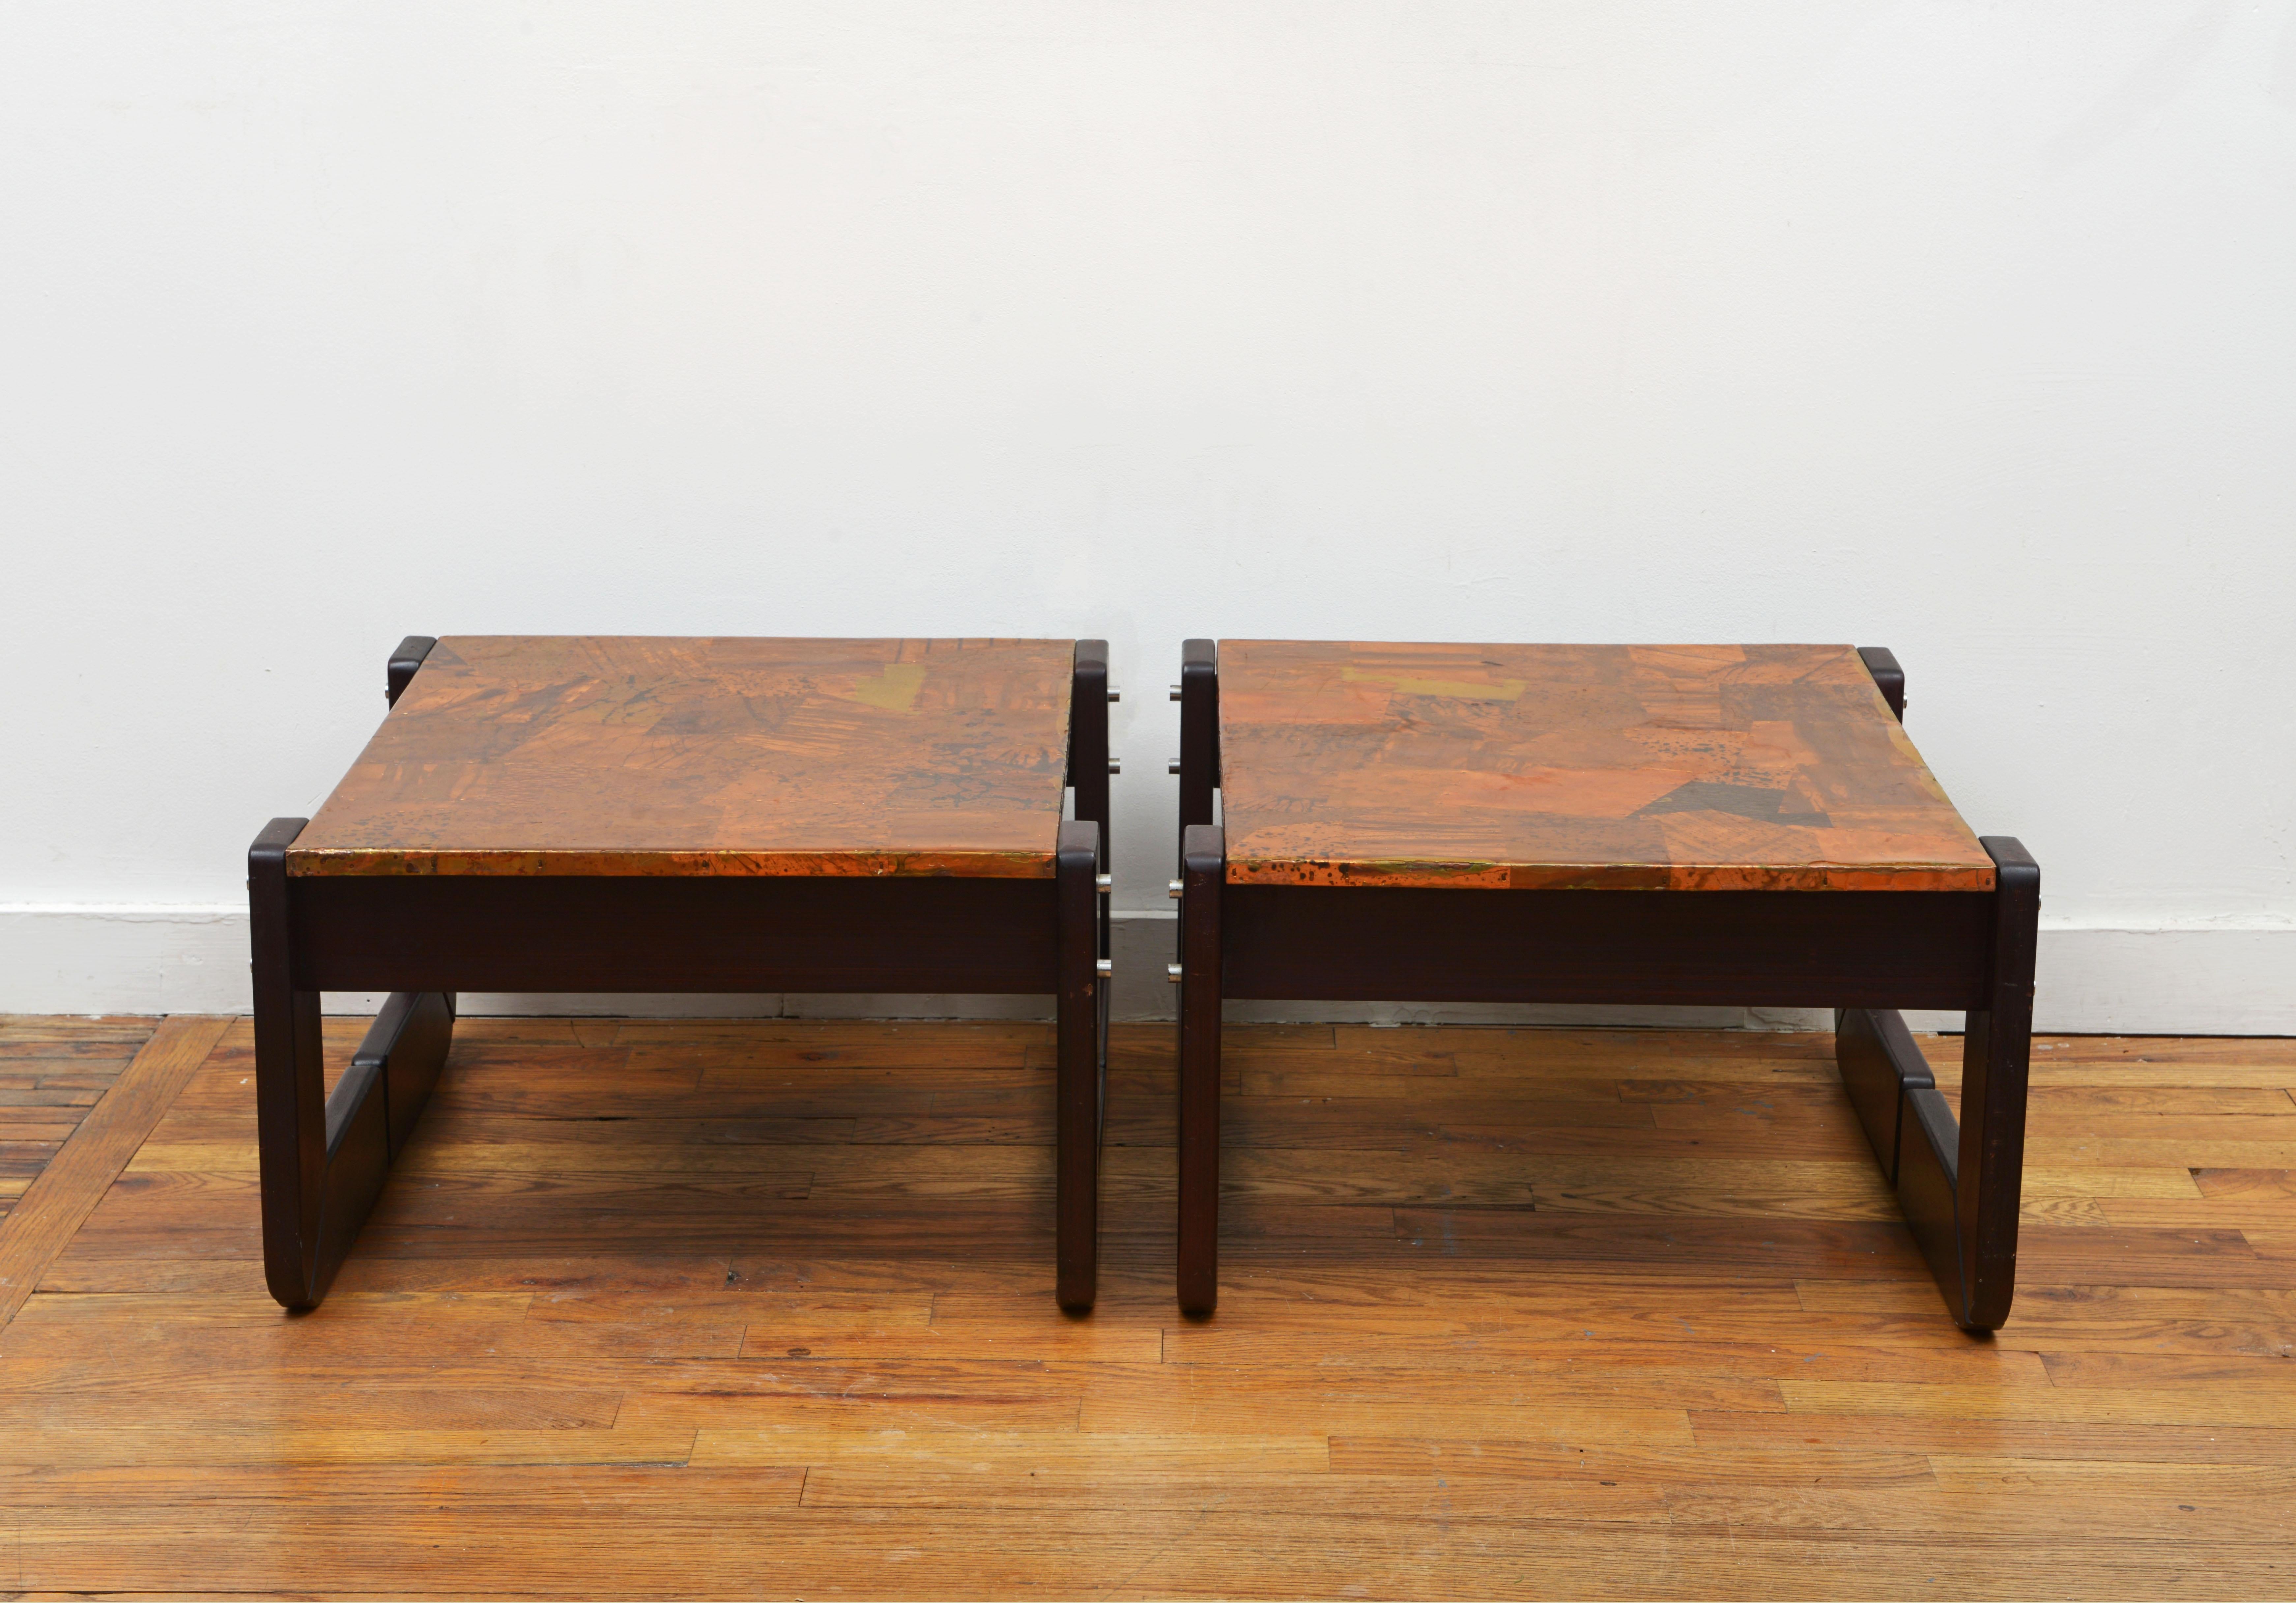 Brazilian Percival Lafer Copper Patchwork and Rosewood End Tables 1970s, 'Signed' For Sale